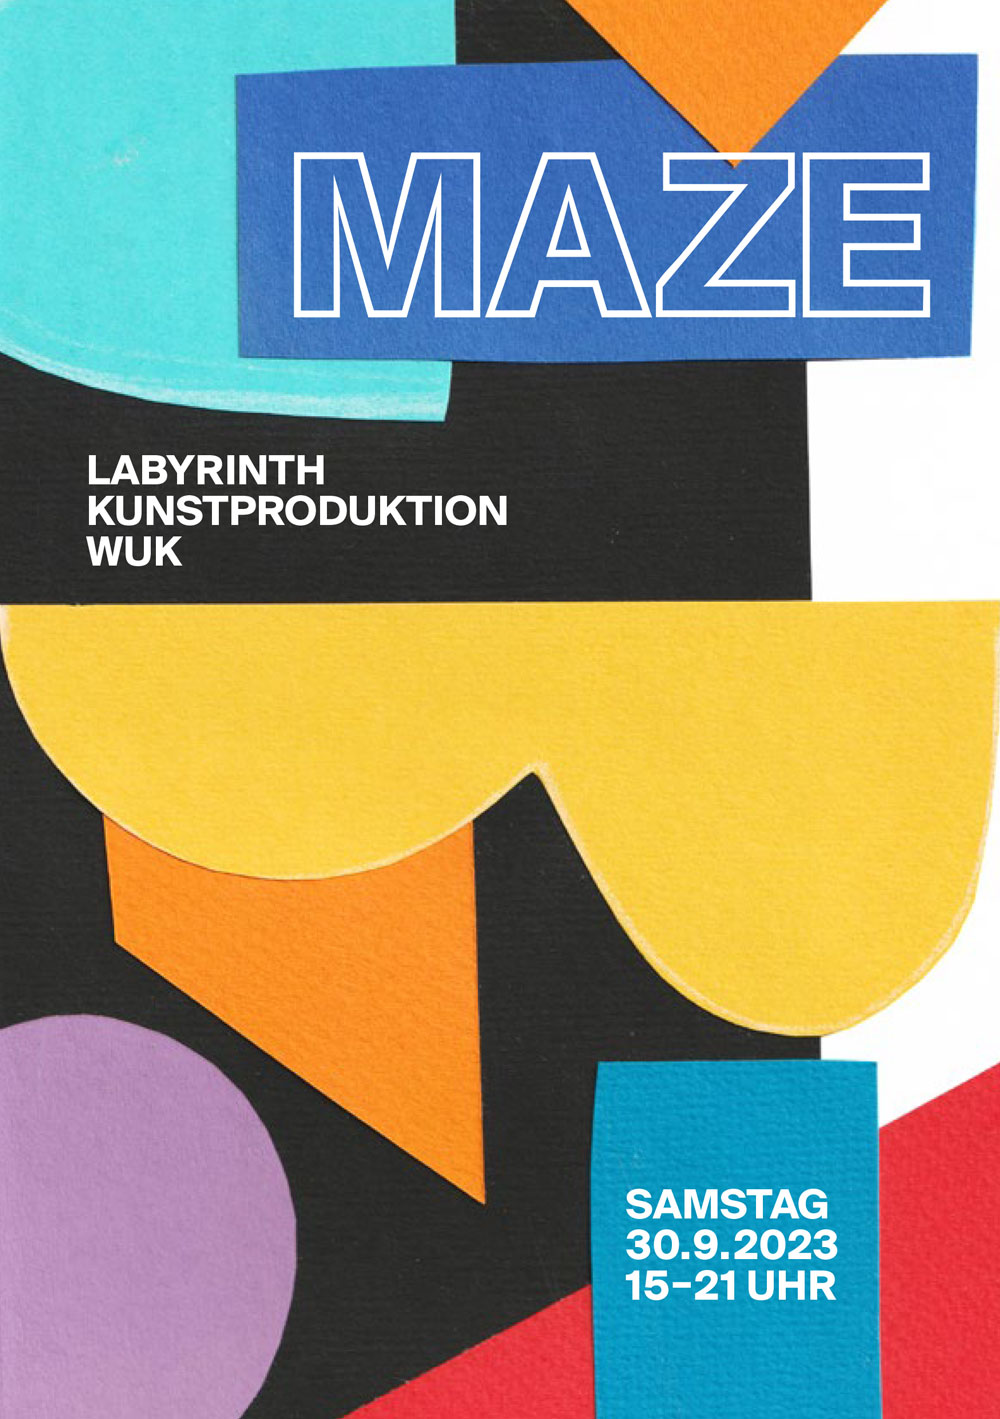 Flyer for the MAZE event, open studio day. The digital flyer features an illustration depicting various abstract geometric shapes made of paper.